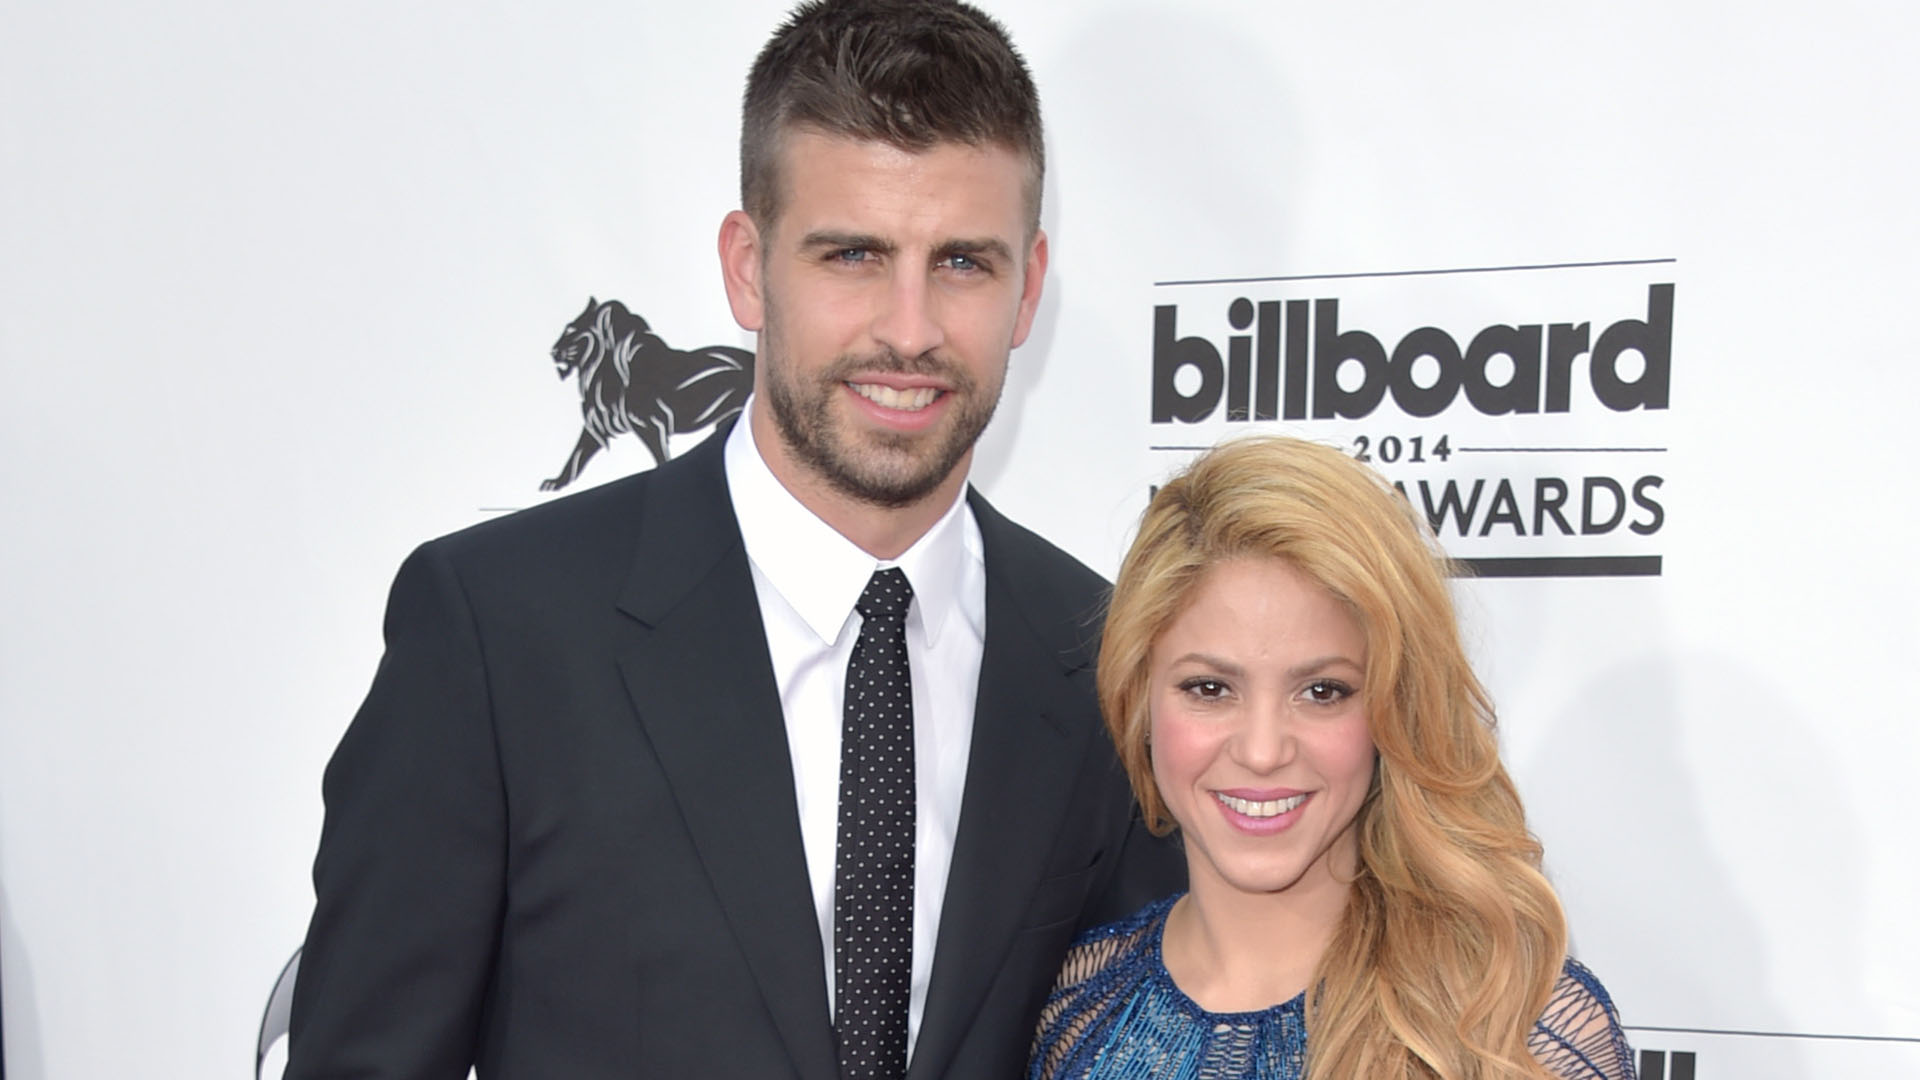 Soccerplayer Gerard Pique and singer Shakira attending the Billboard Music Awards on Sunday, May 18, 2014, in Las Vegas